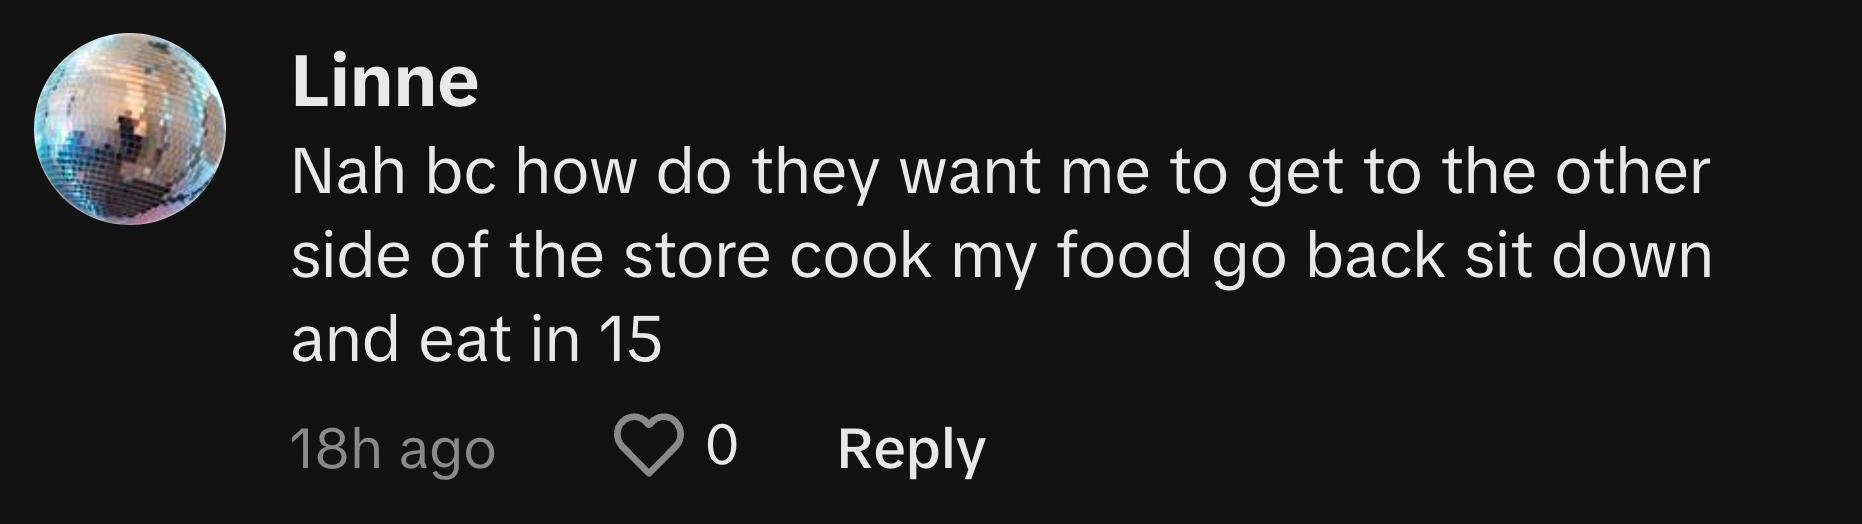 TikTok user @i.am.linne.2 commented, "Nah, bc how do they want me to get to the other side of the store, cook my food, go back, sit down, and eat in 15?"